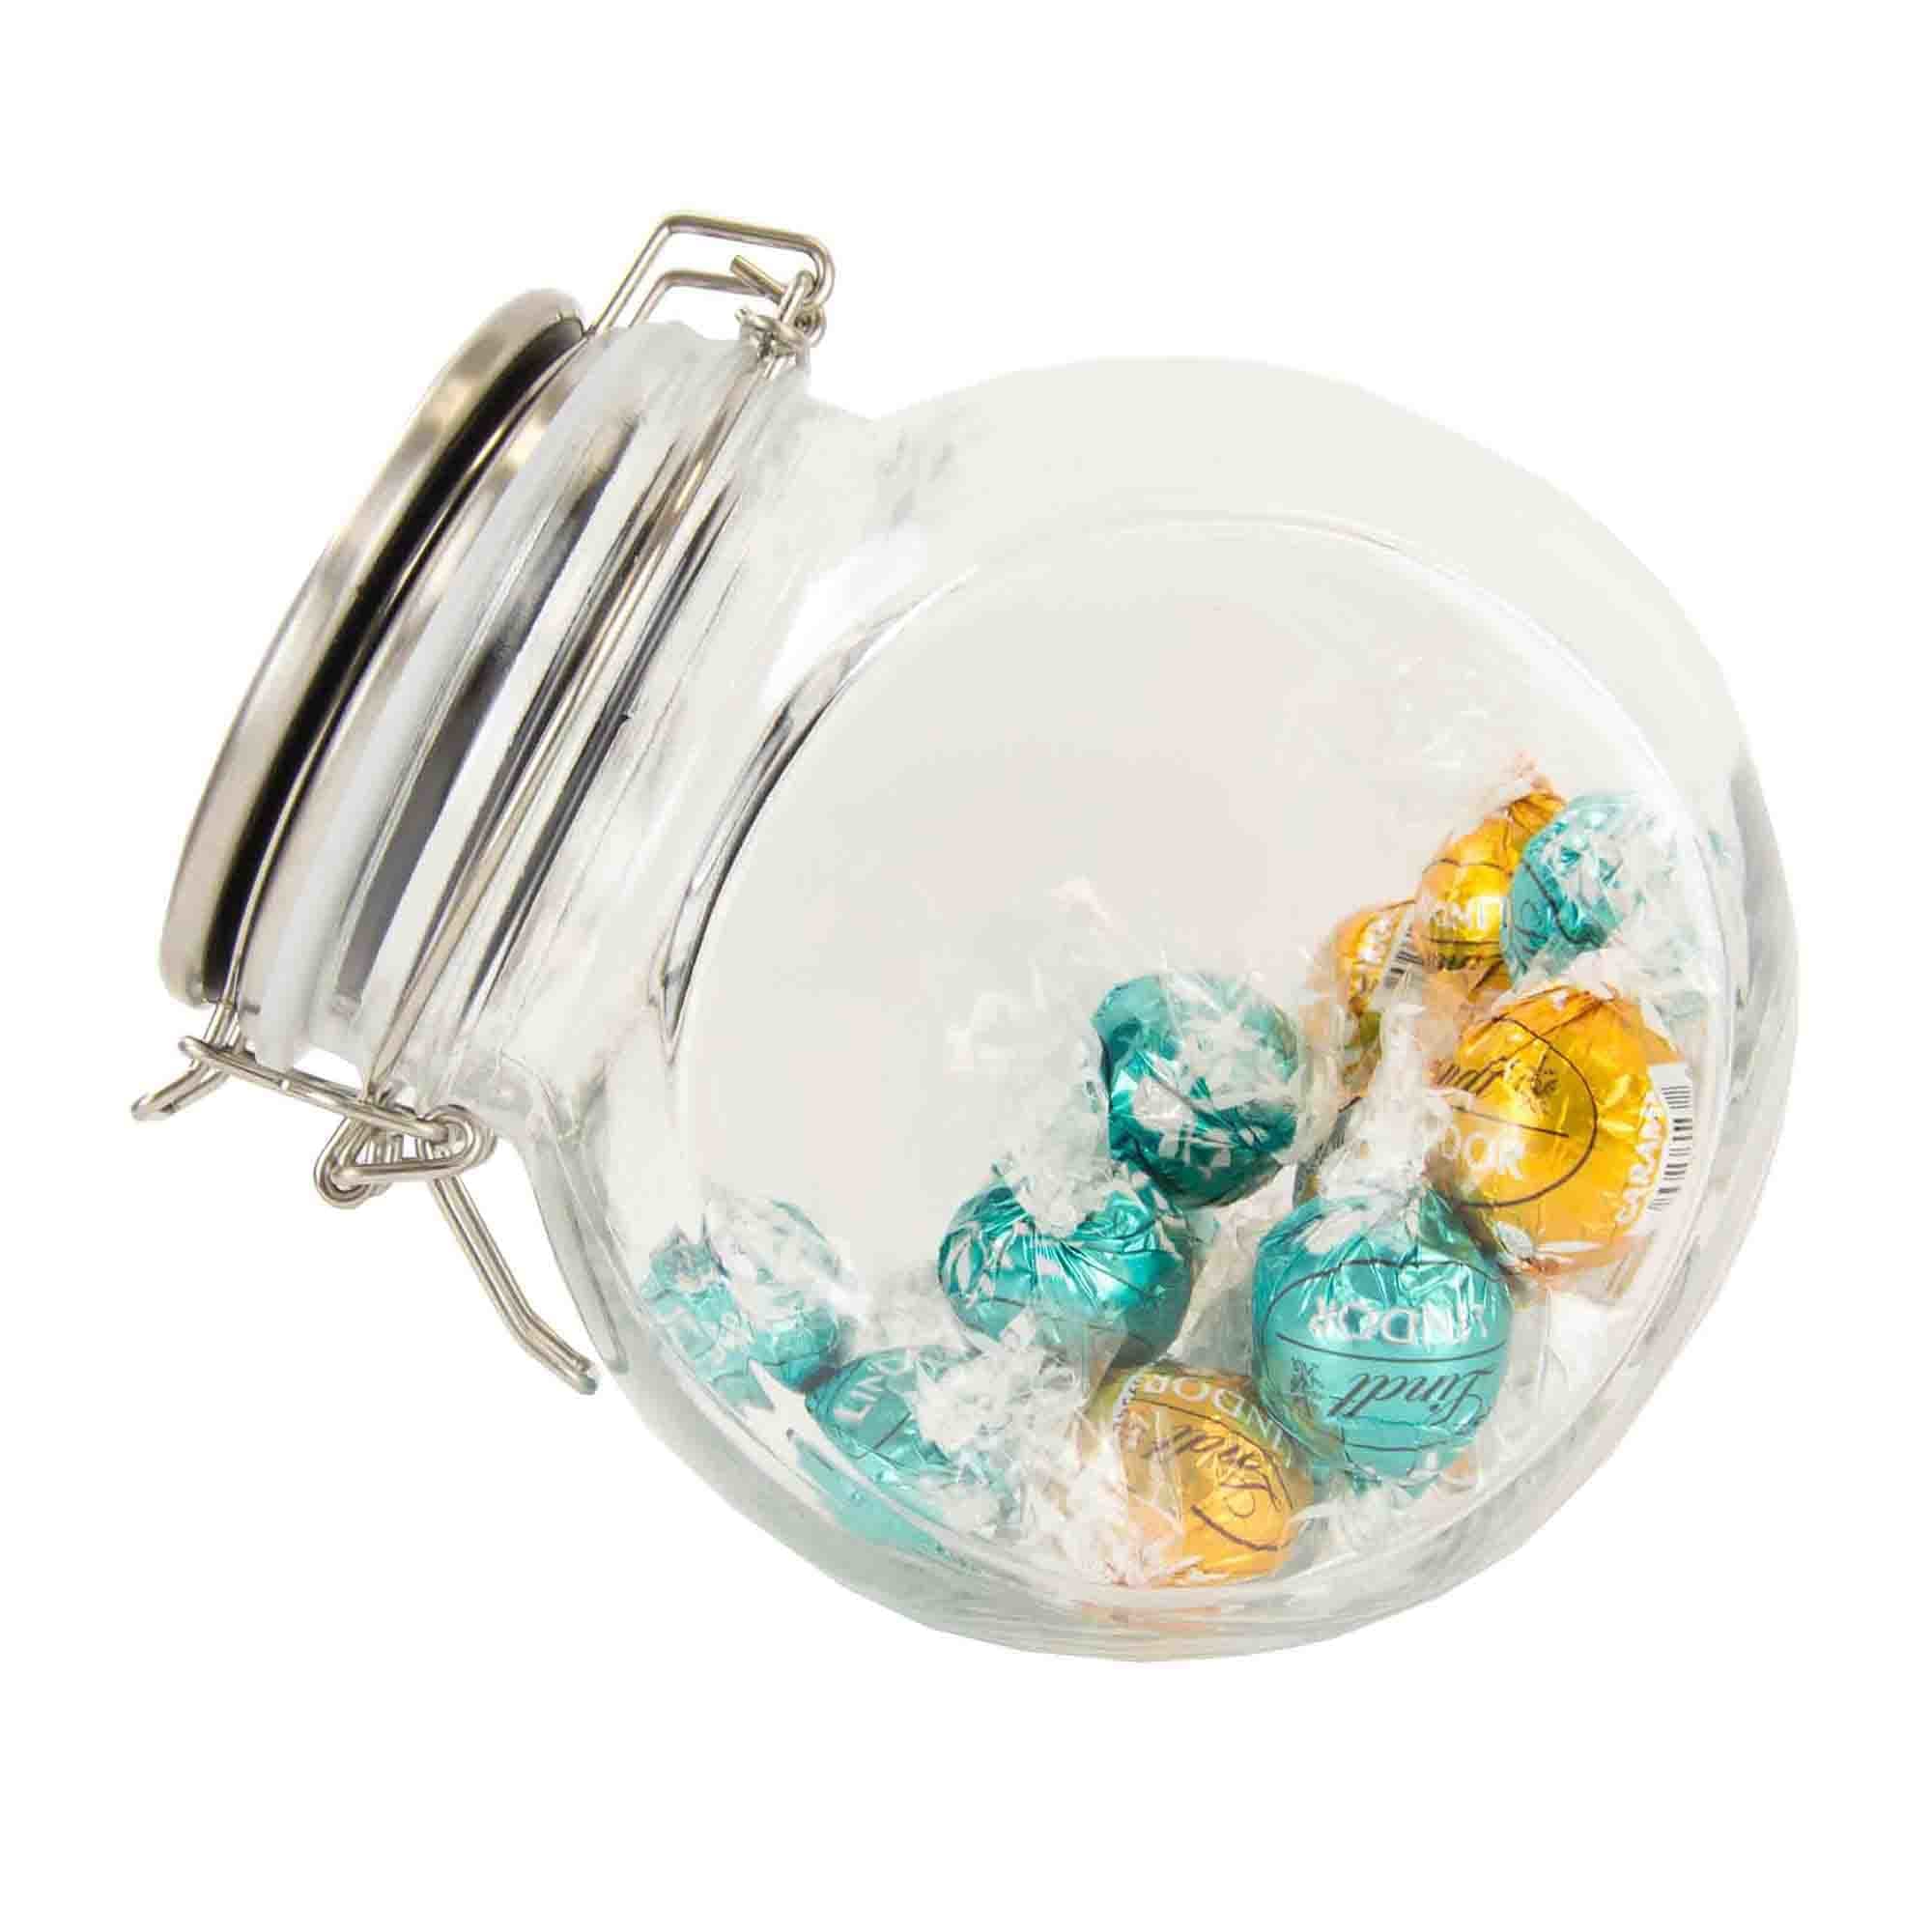 Home Basics 44 oz. Glass Candy Jar $3.50 EACH, CASE PACK OF 12